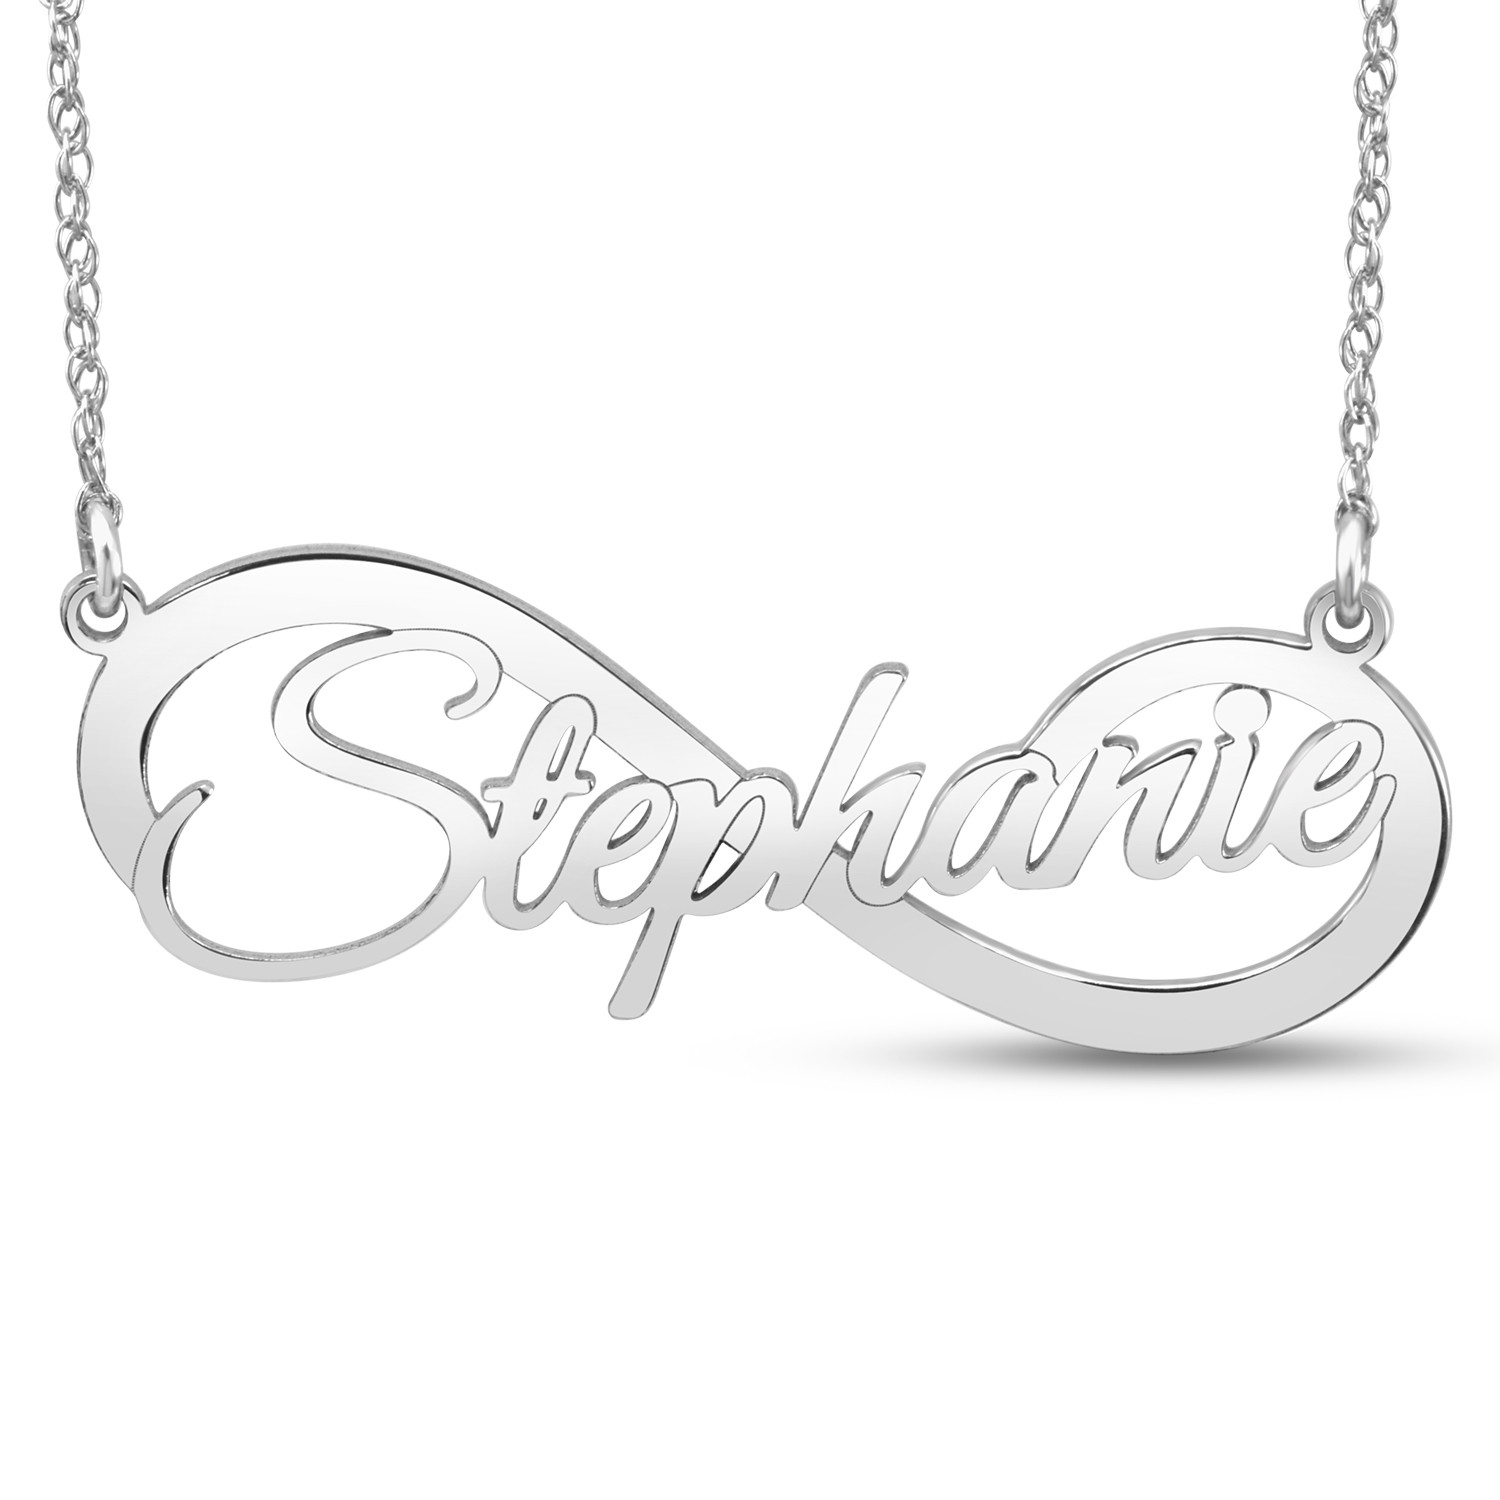 HI Polish Name Pers Necklace - 9 character max, 1 Uppercase letter (Example: Stephanie S=8.01mm x 1.27" e=3.41mm)